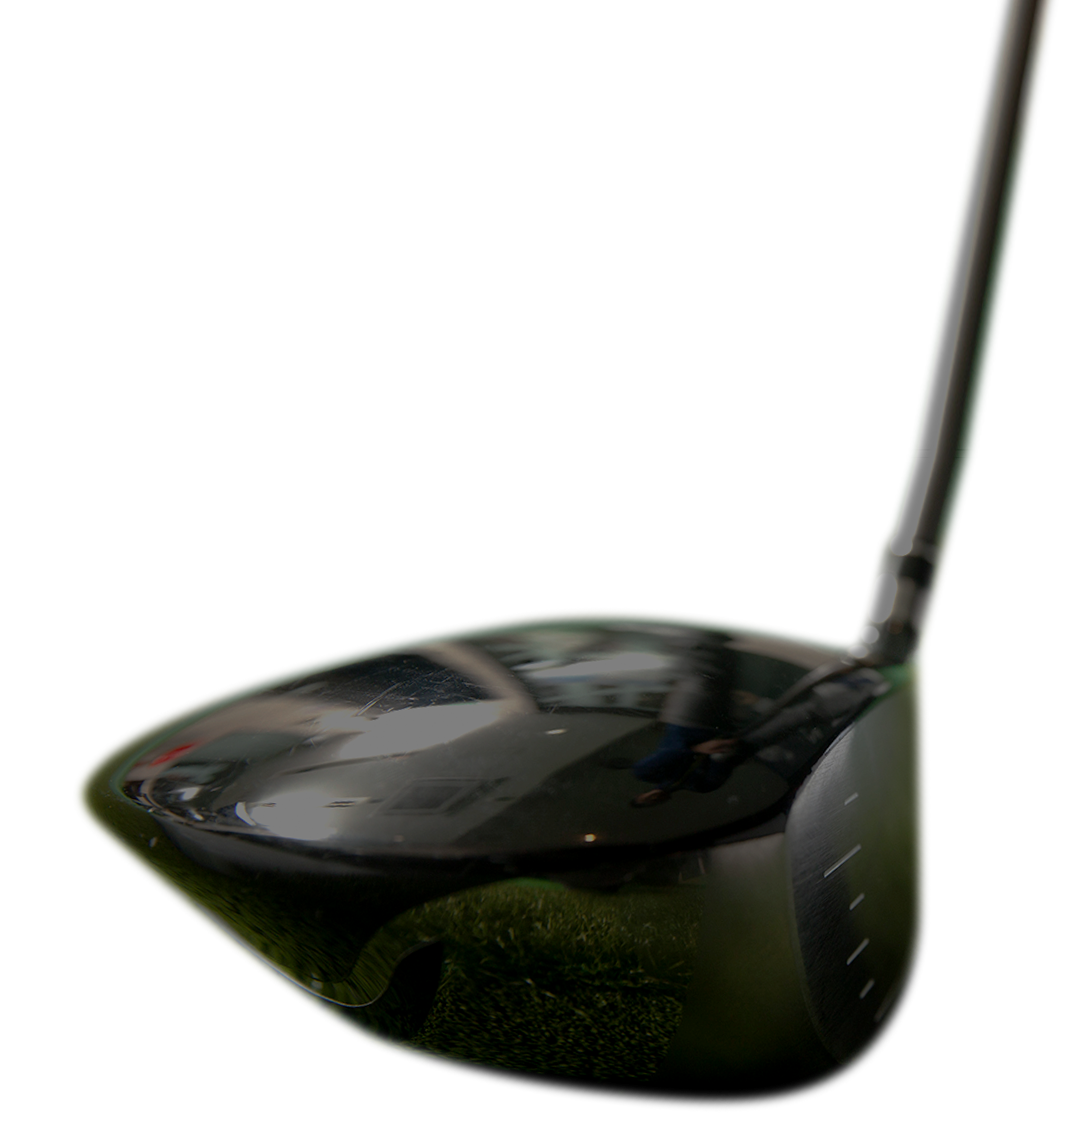 Golf club head and shaft in close-up